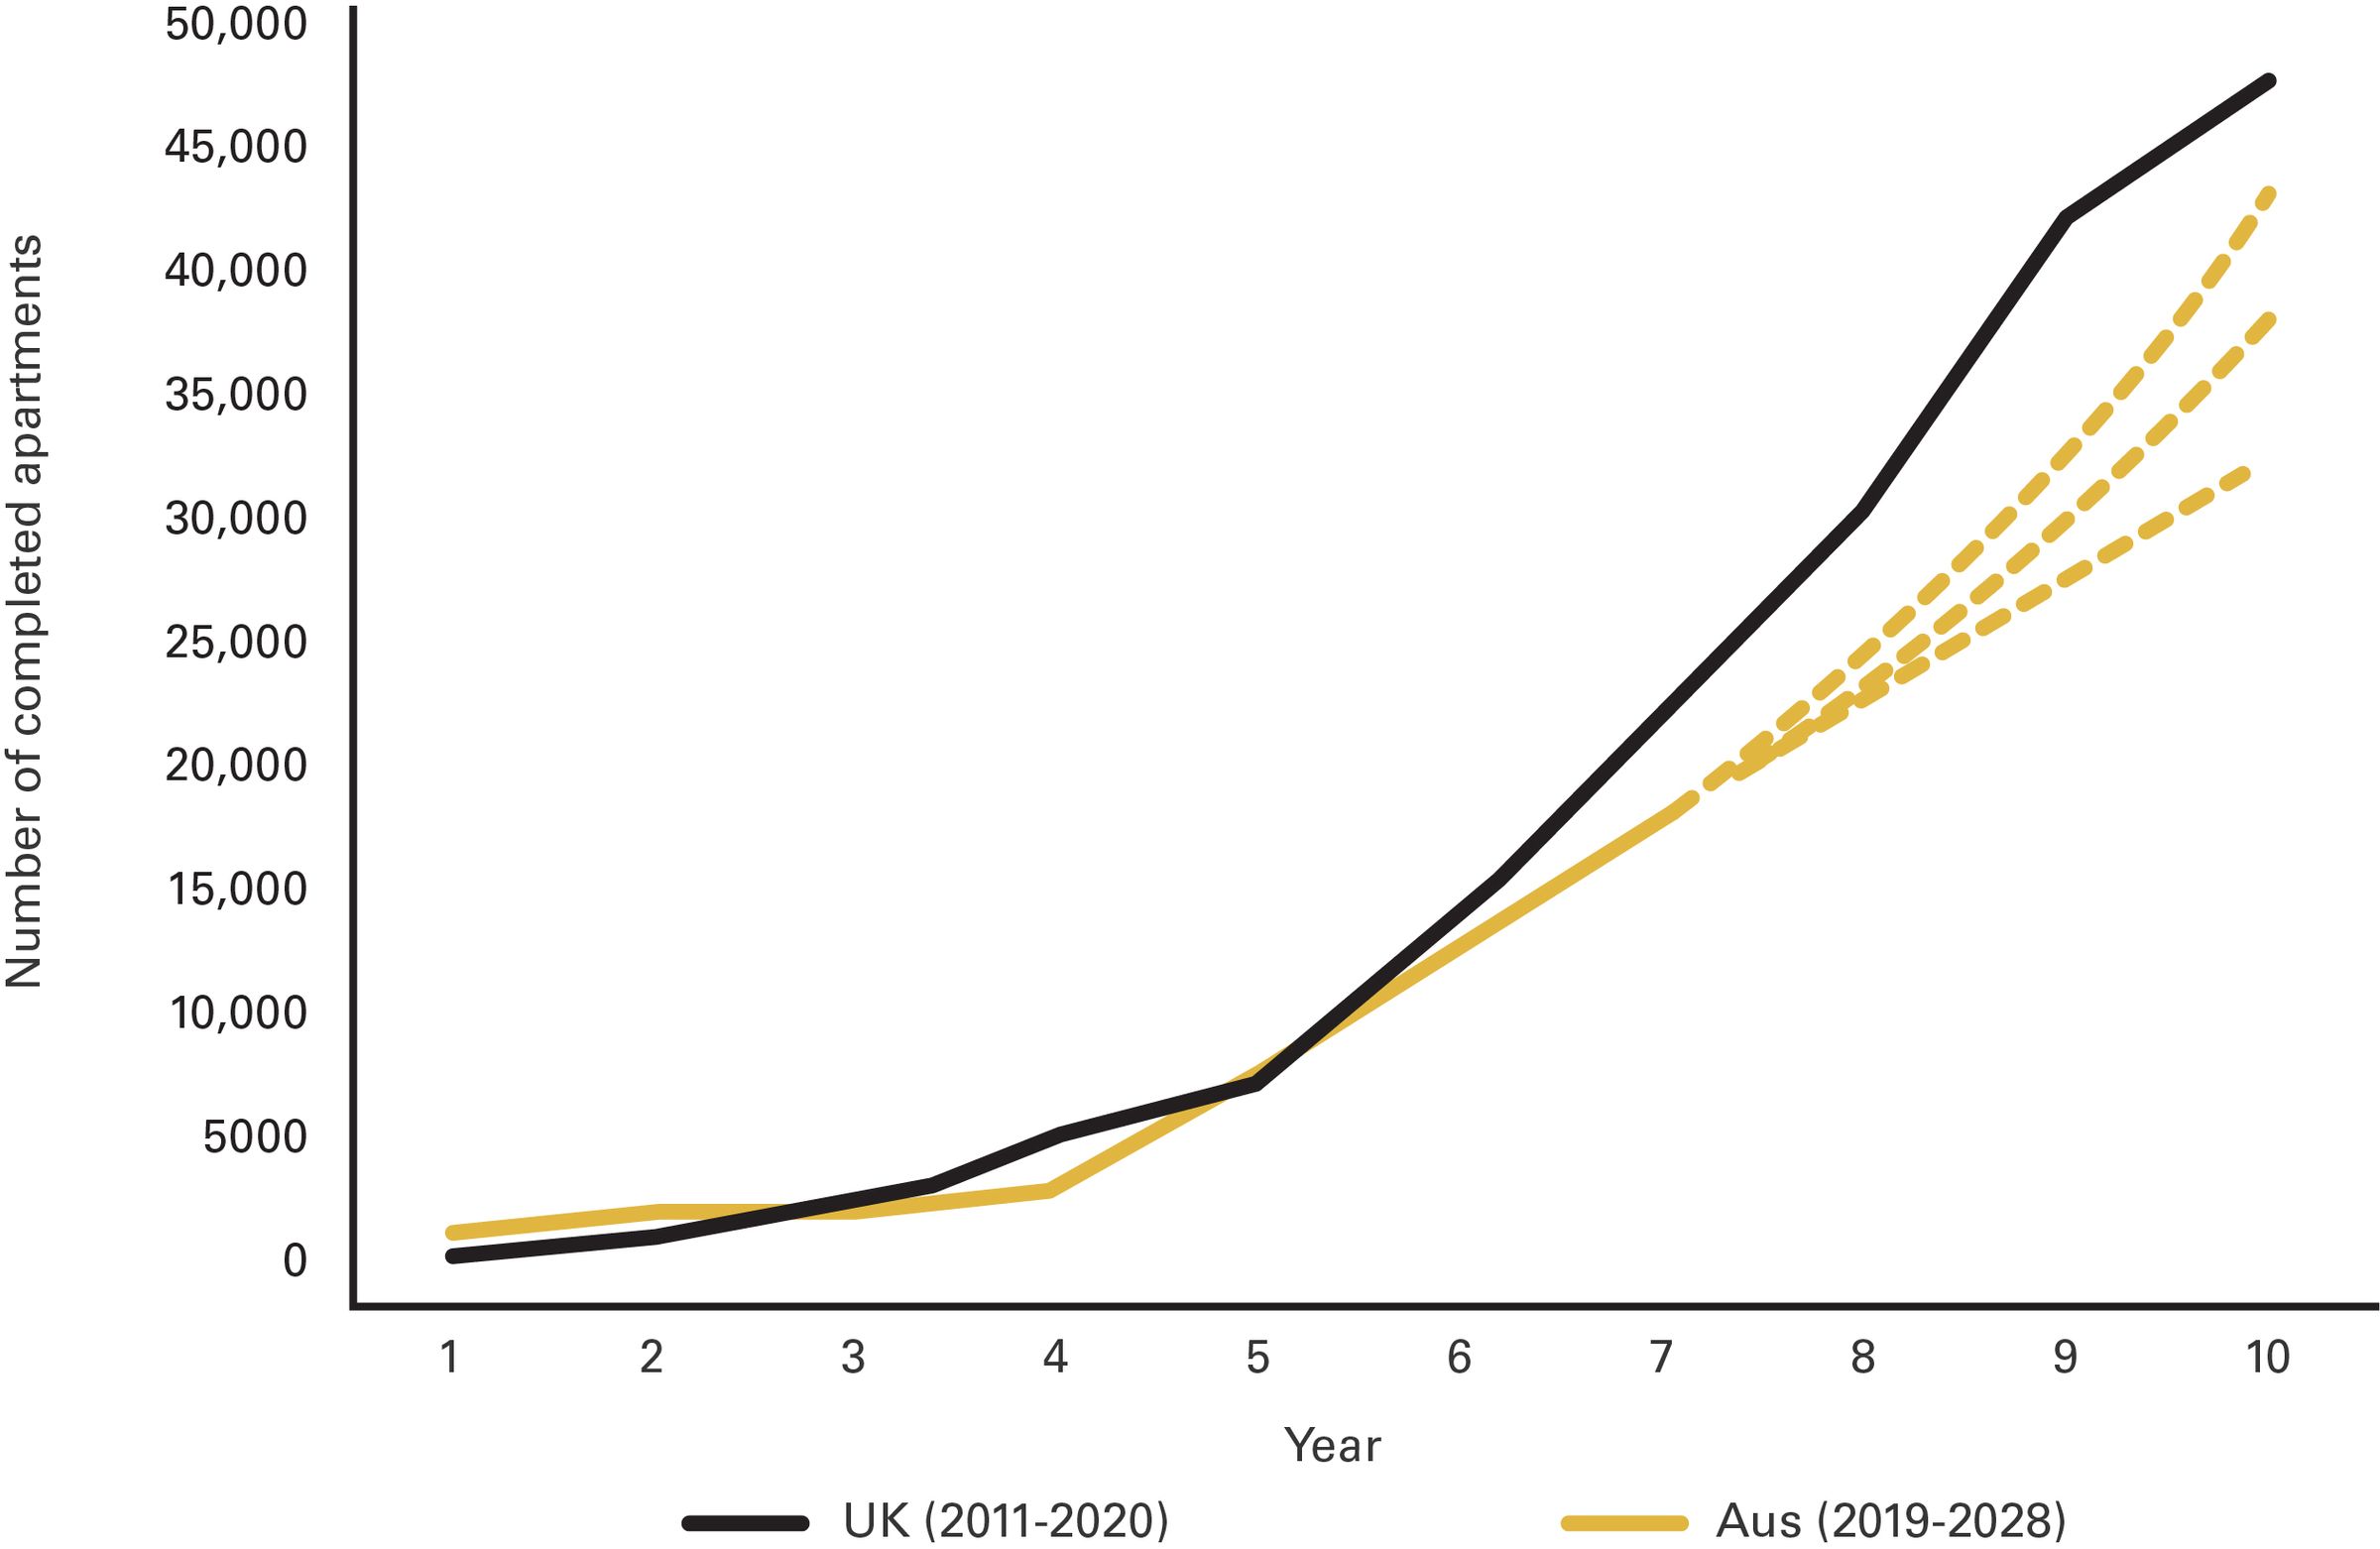 A line graph with number of completed apartments from 0 to 50,000 in 50,000 increments on the vertical axis and years 0 - 10 in single increments on the horizontal axis, with an increasing solid black line indicating UK growth from 2011 to 2021 and an increasing solid yellow line indicating Australian growth from 2019 to 2028